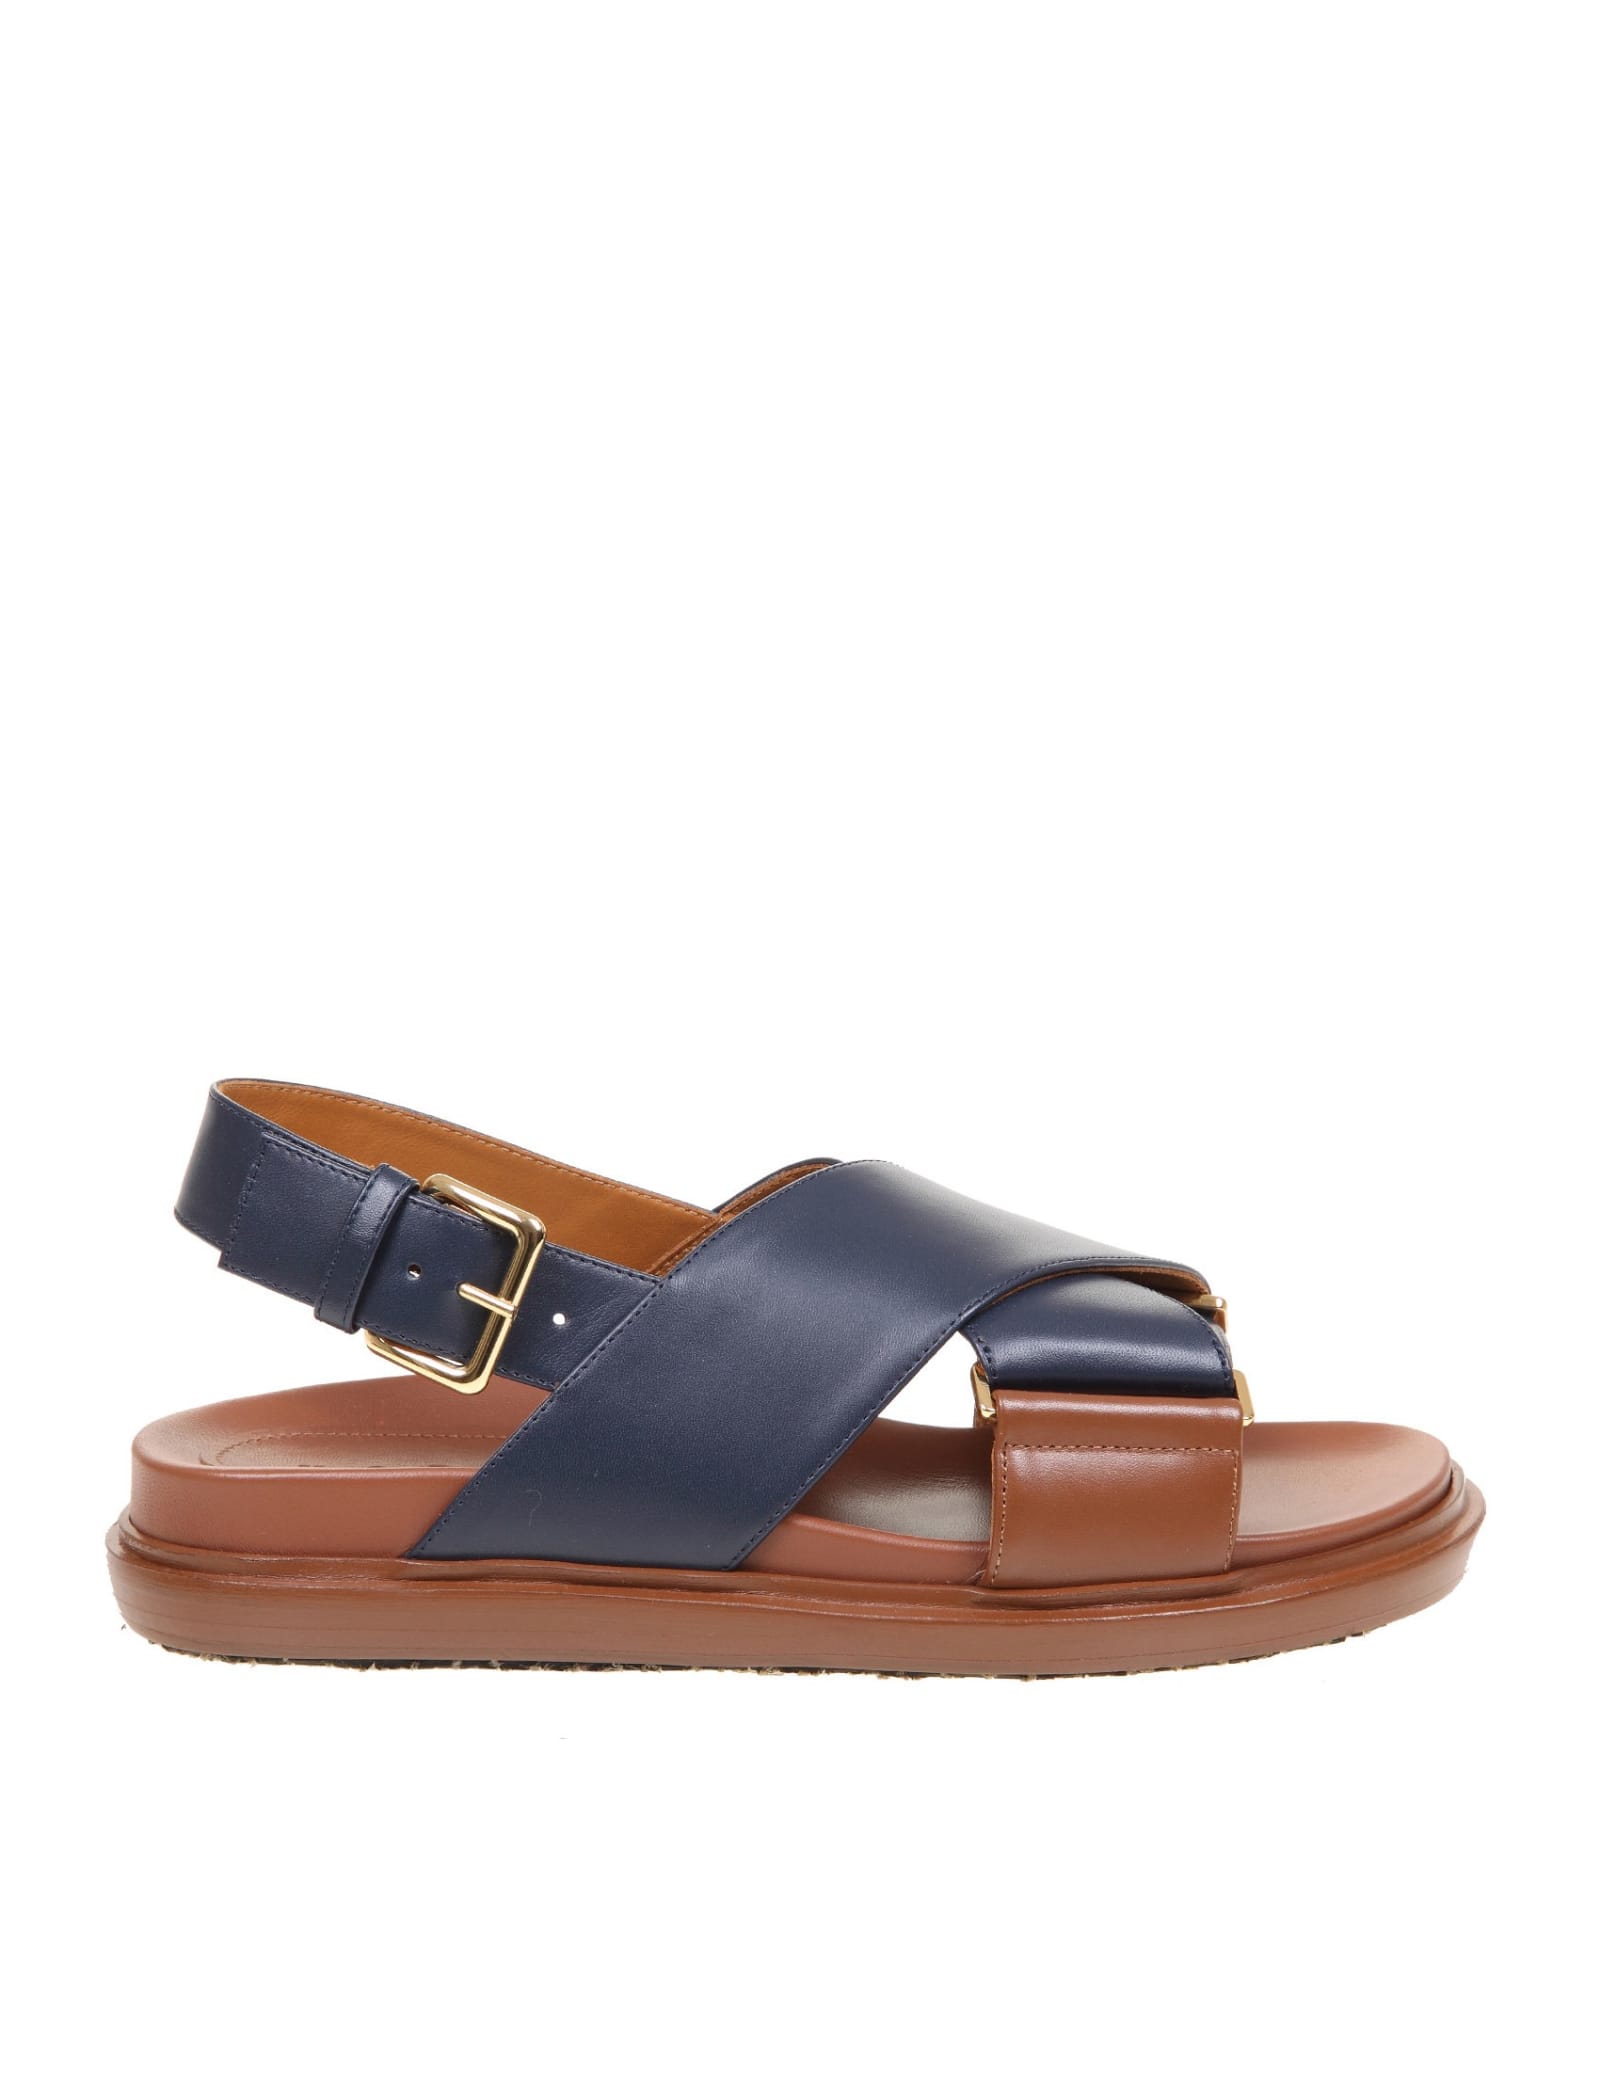 Marni Fussbett Sandal In Blue Leather And Leather